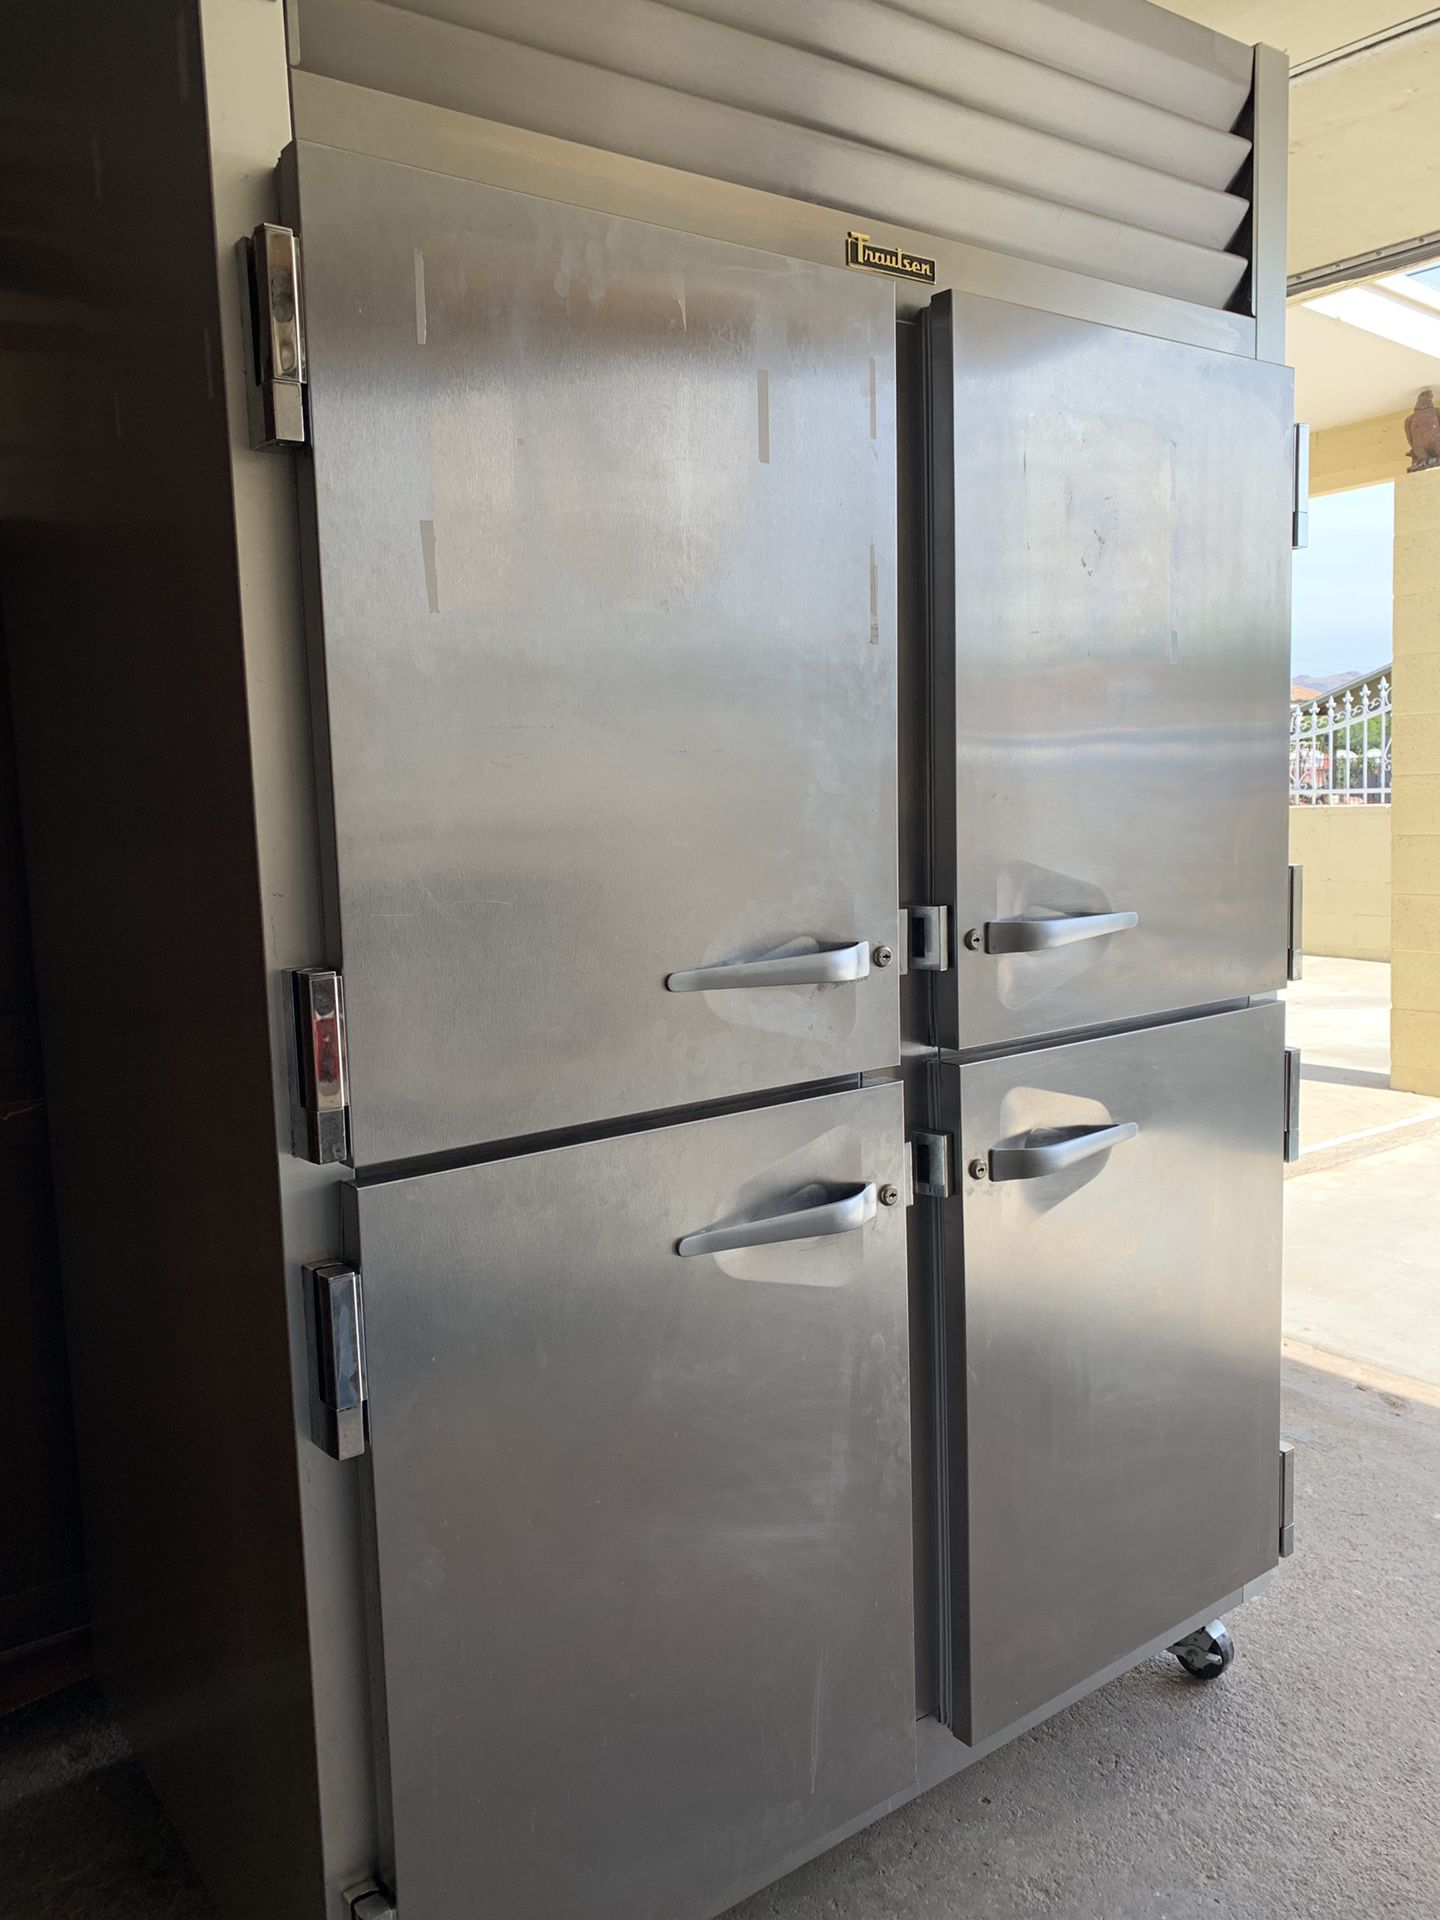 Traulsen commercial refrigerator for sale, perfect working condition. 52” wide by 82”high.